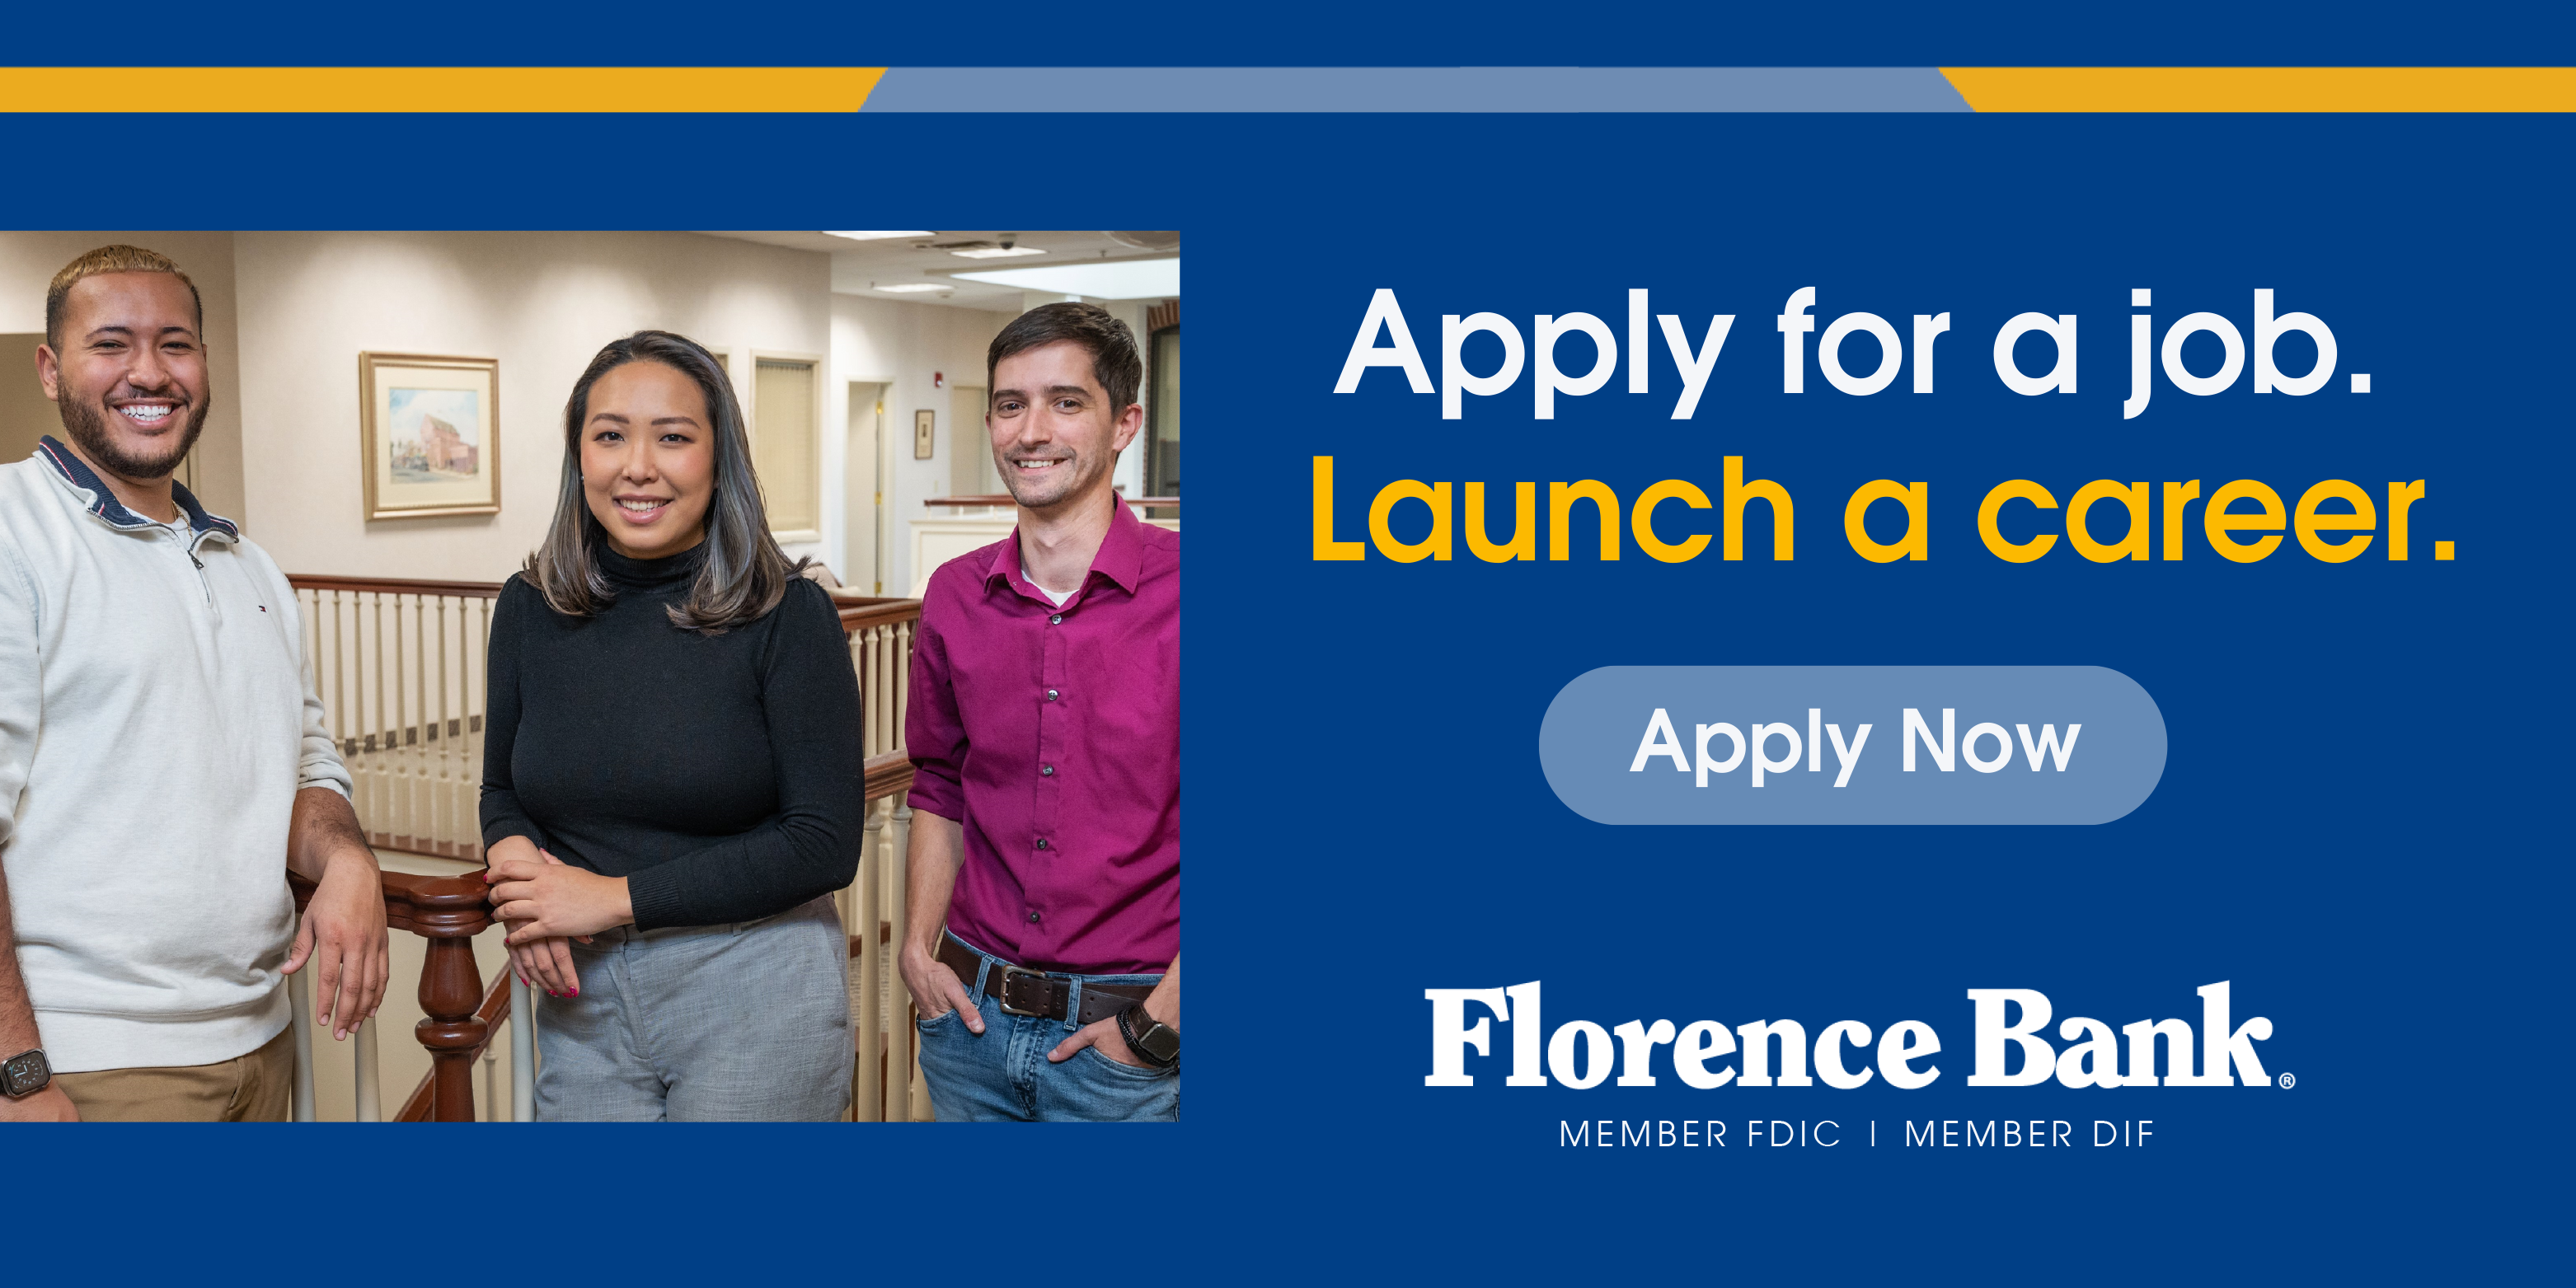 Apply for a career at Florence Bank